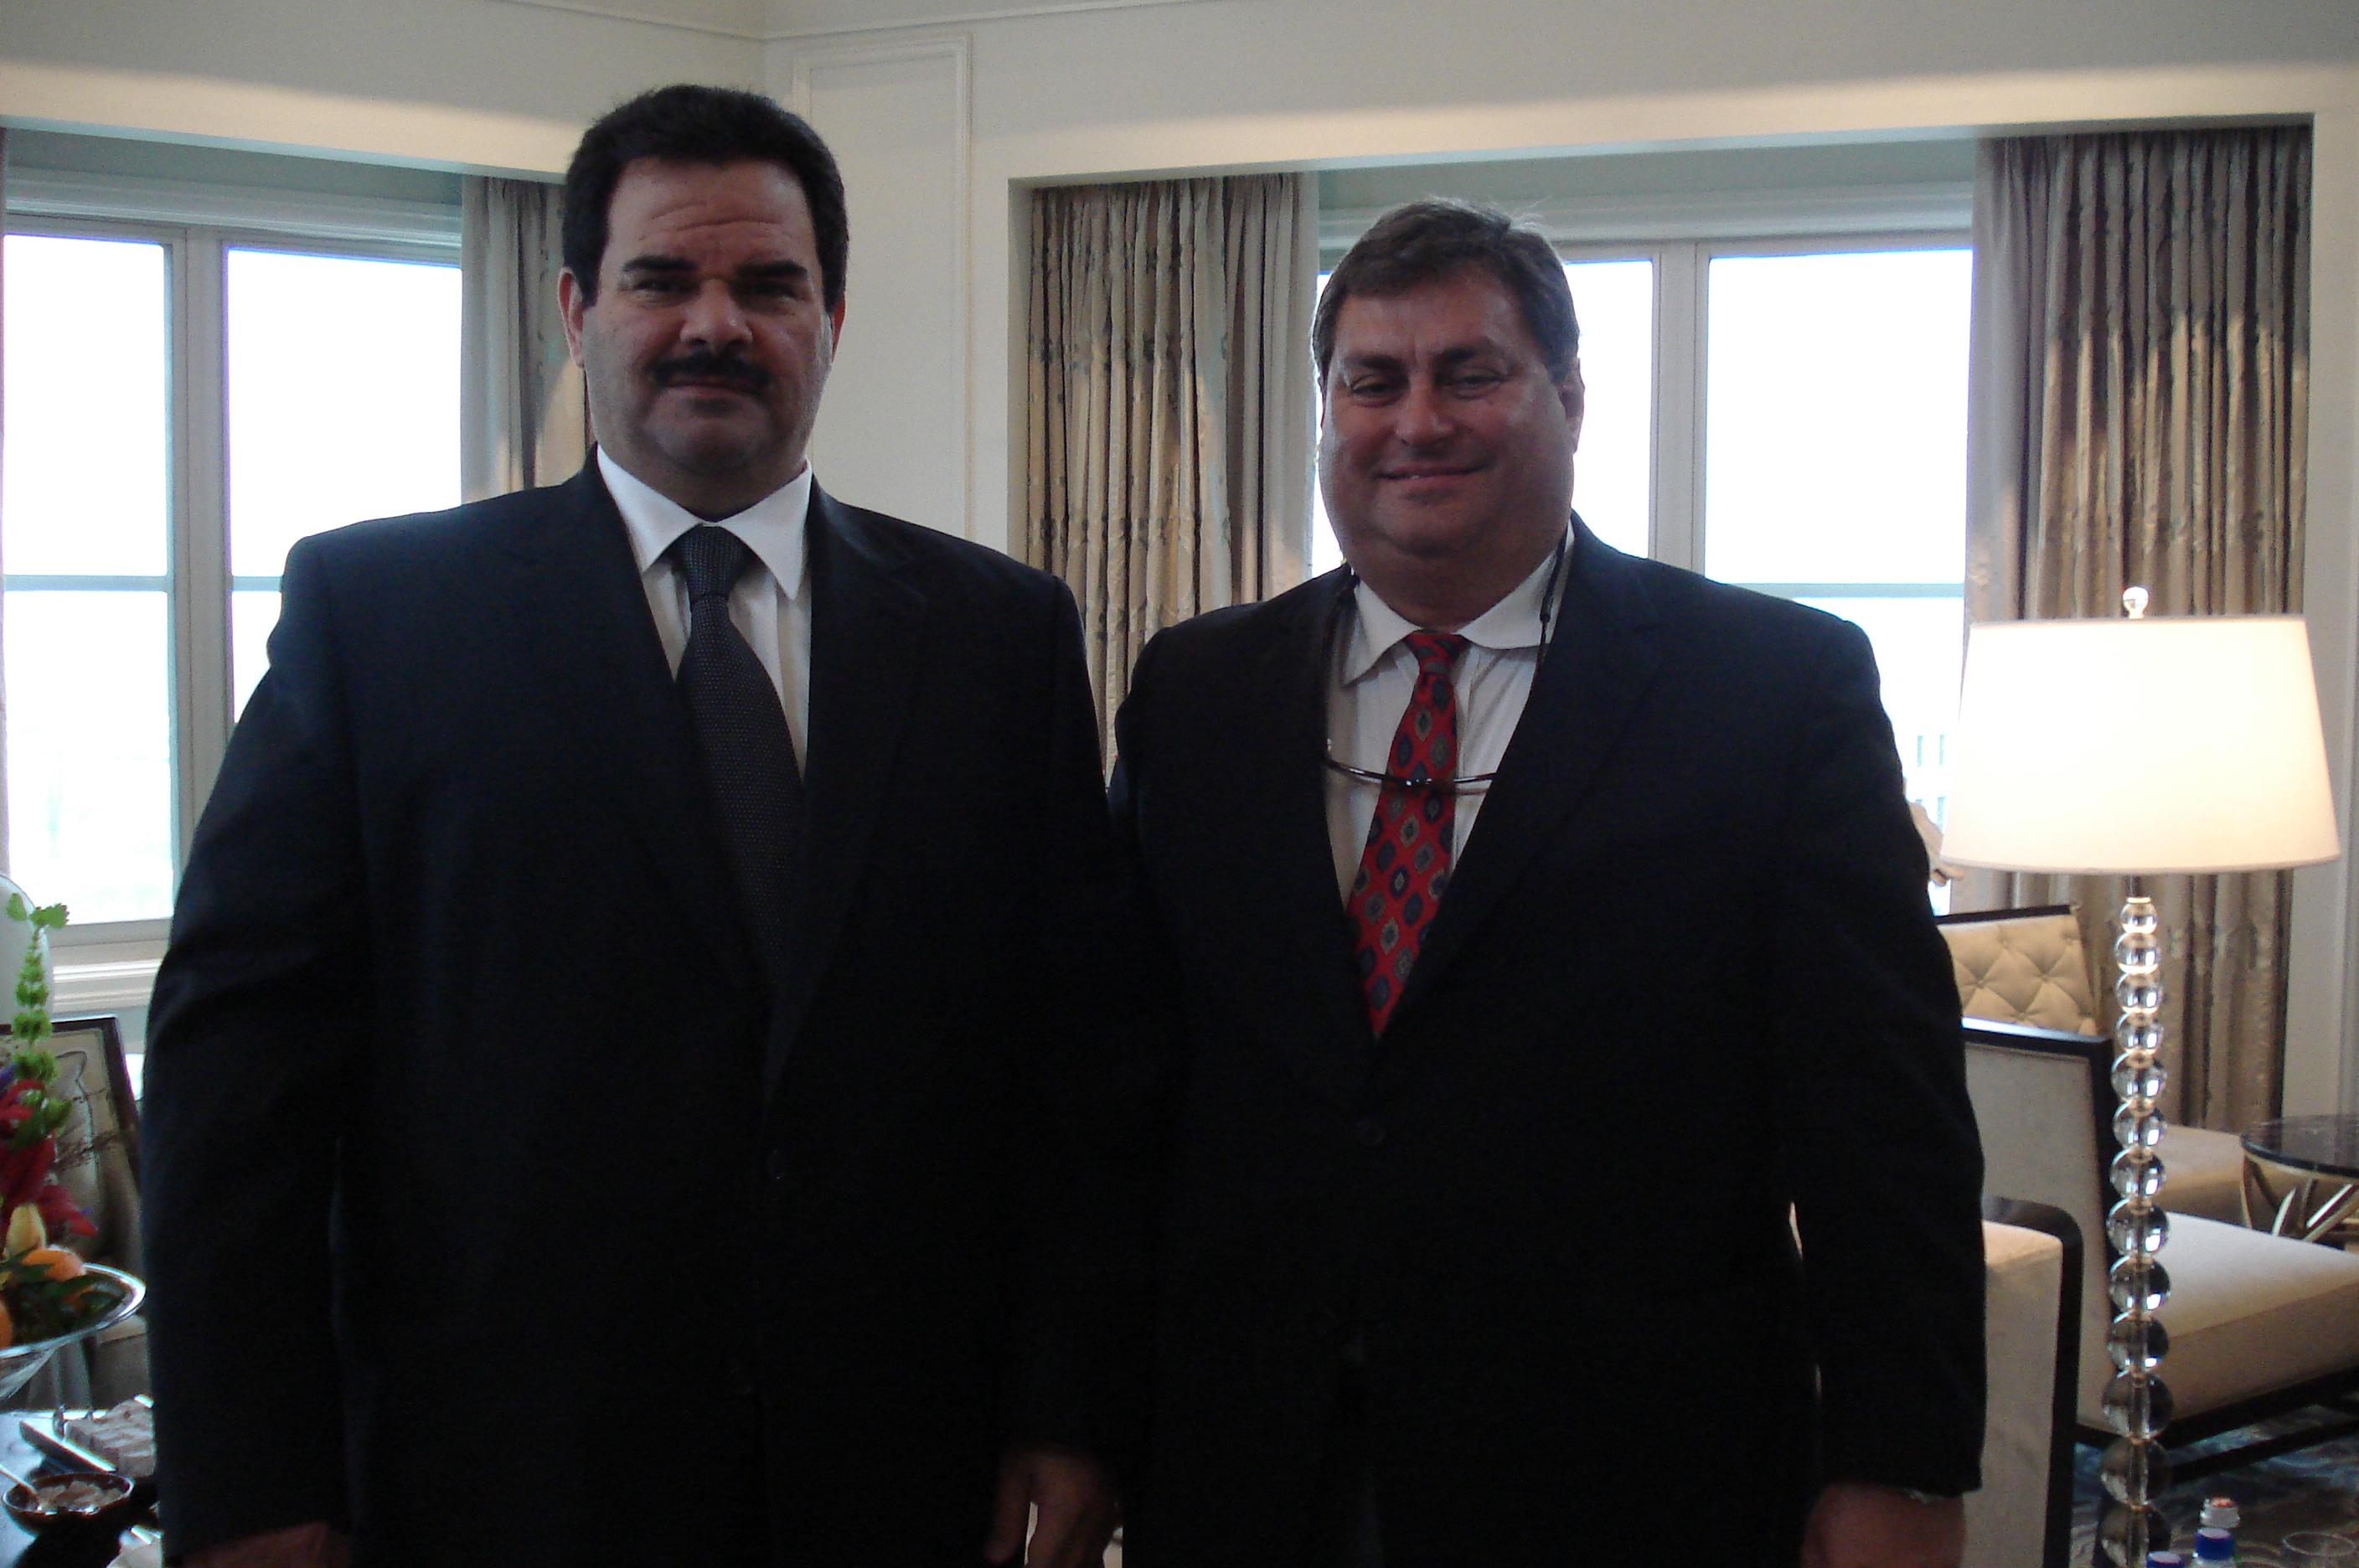 Business discussion, Sheikh Fahad Al Sabah of the Kuwaiti Royal Family  with George M. Sfeir C.E.O. of ENGT in Washington D.C